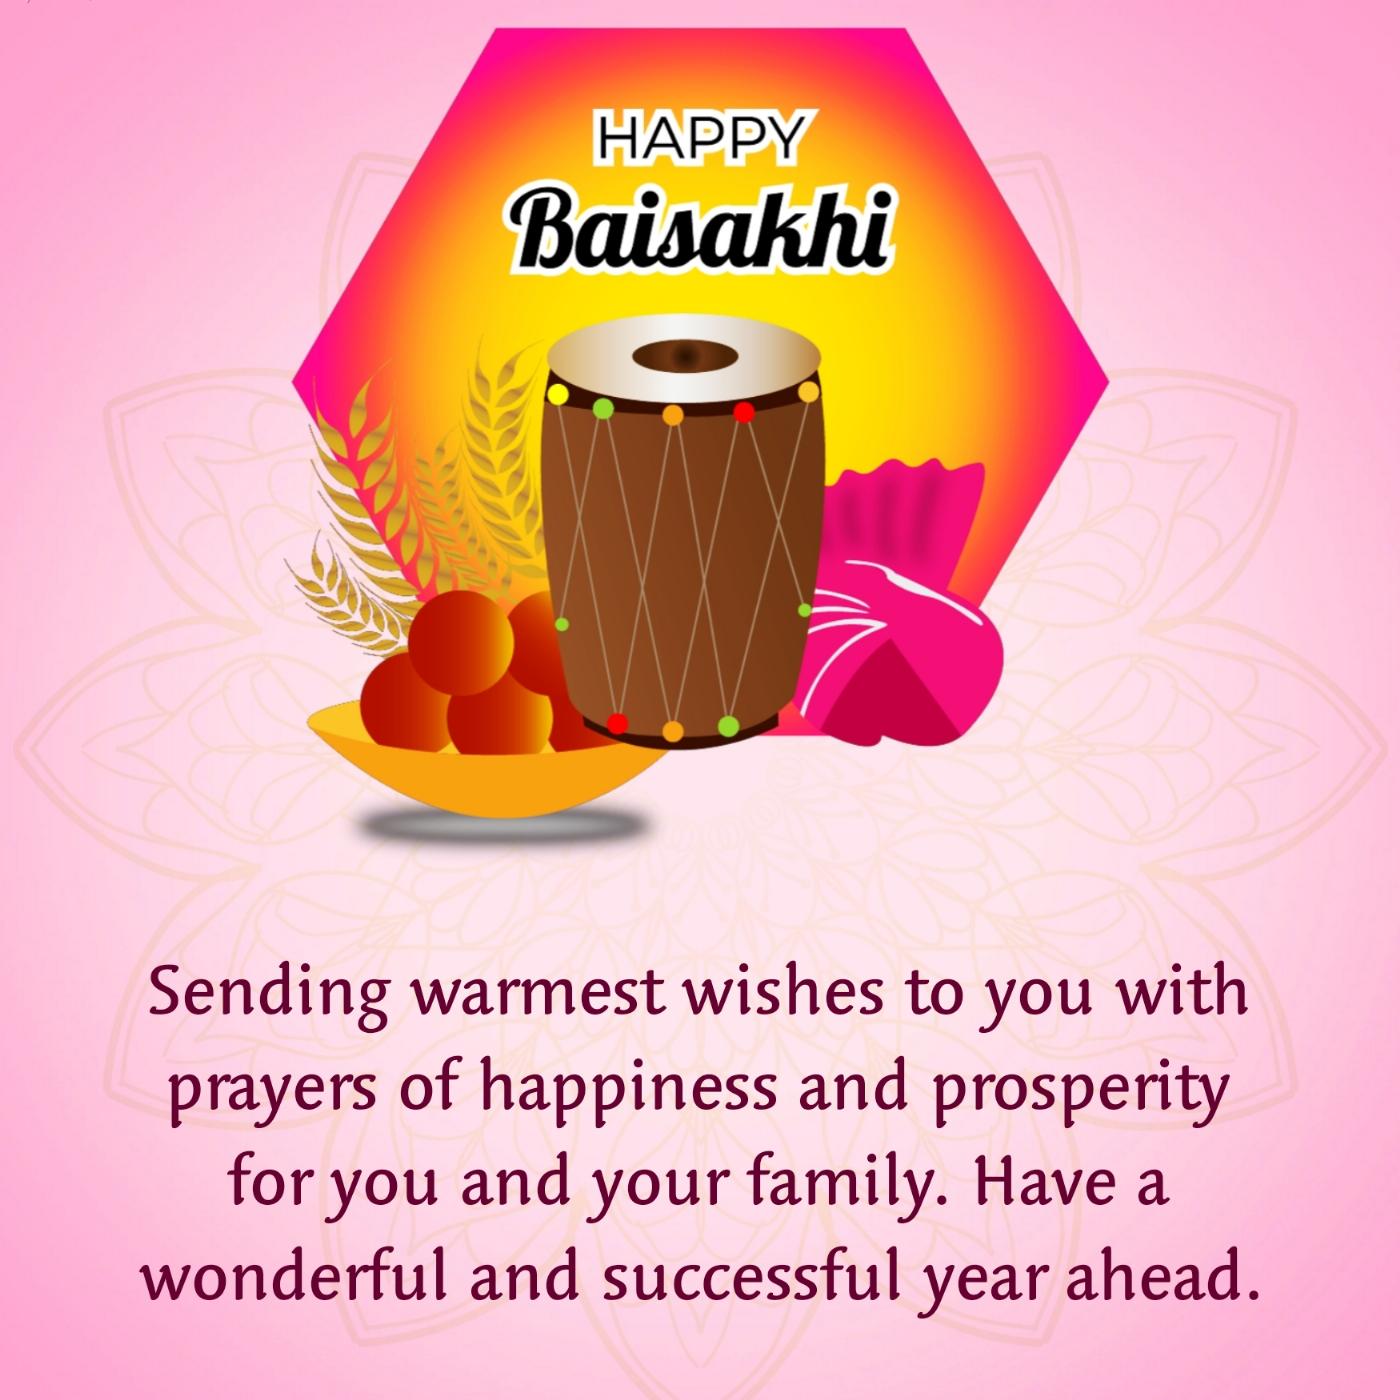 Sending warmest wishes to you with prayers of happiness